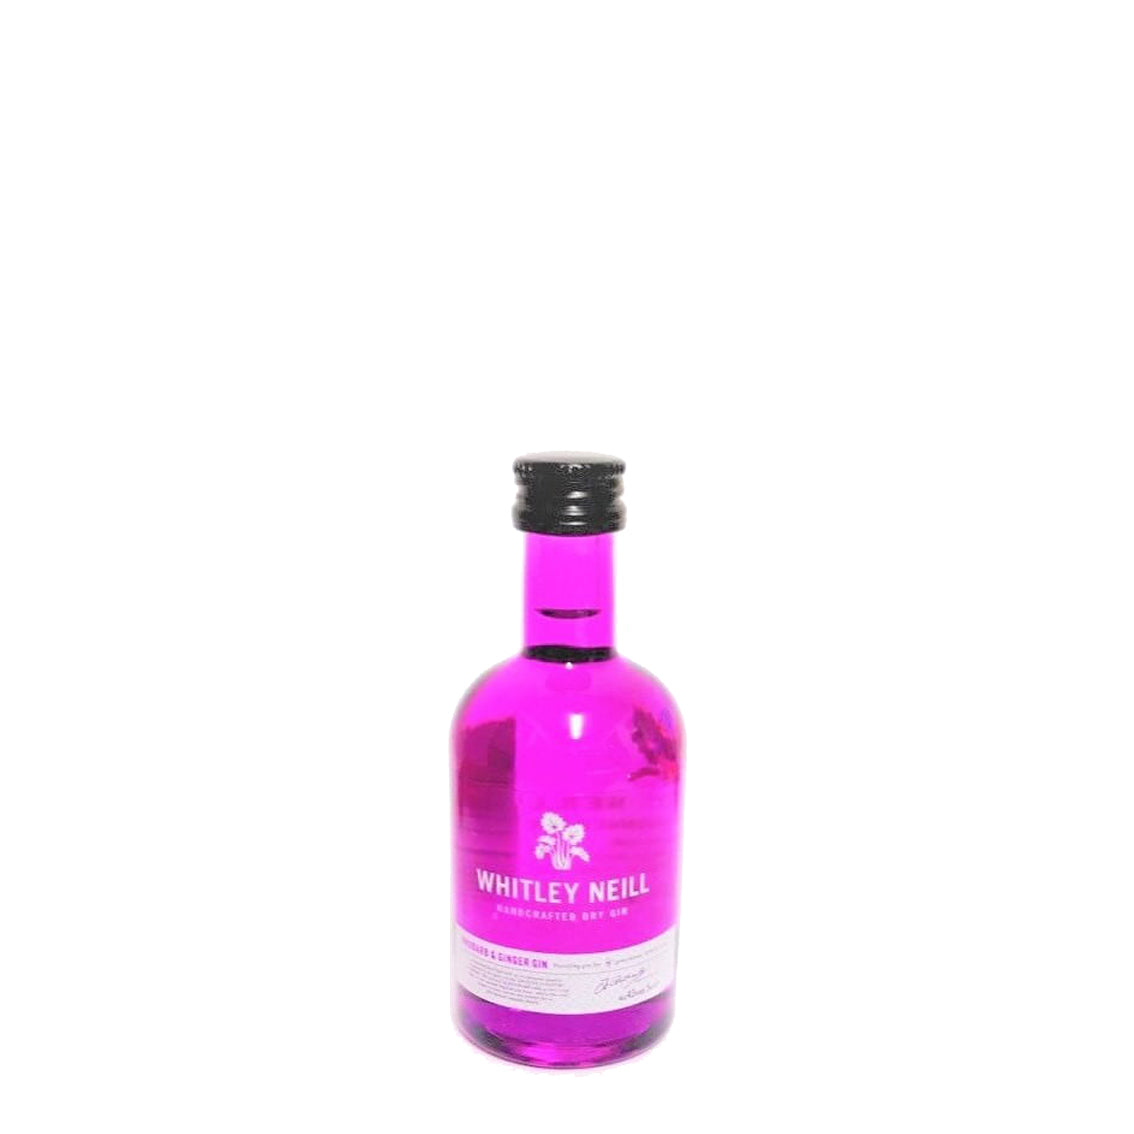 Whitley Neill Rhubarb & Ginger Gin, 5cl - Miniature